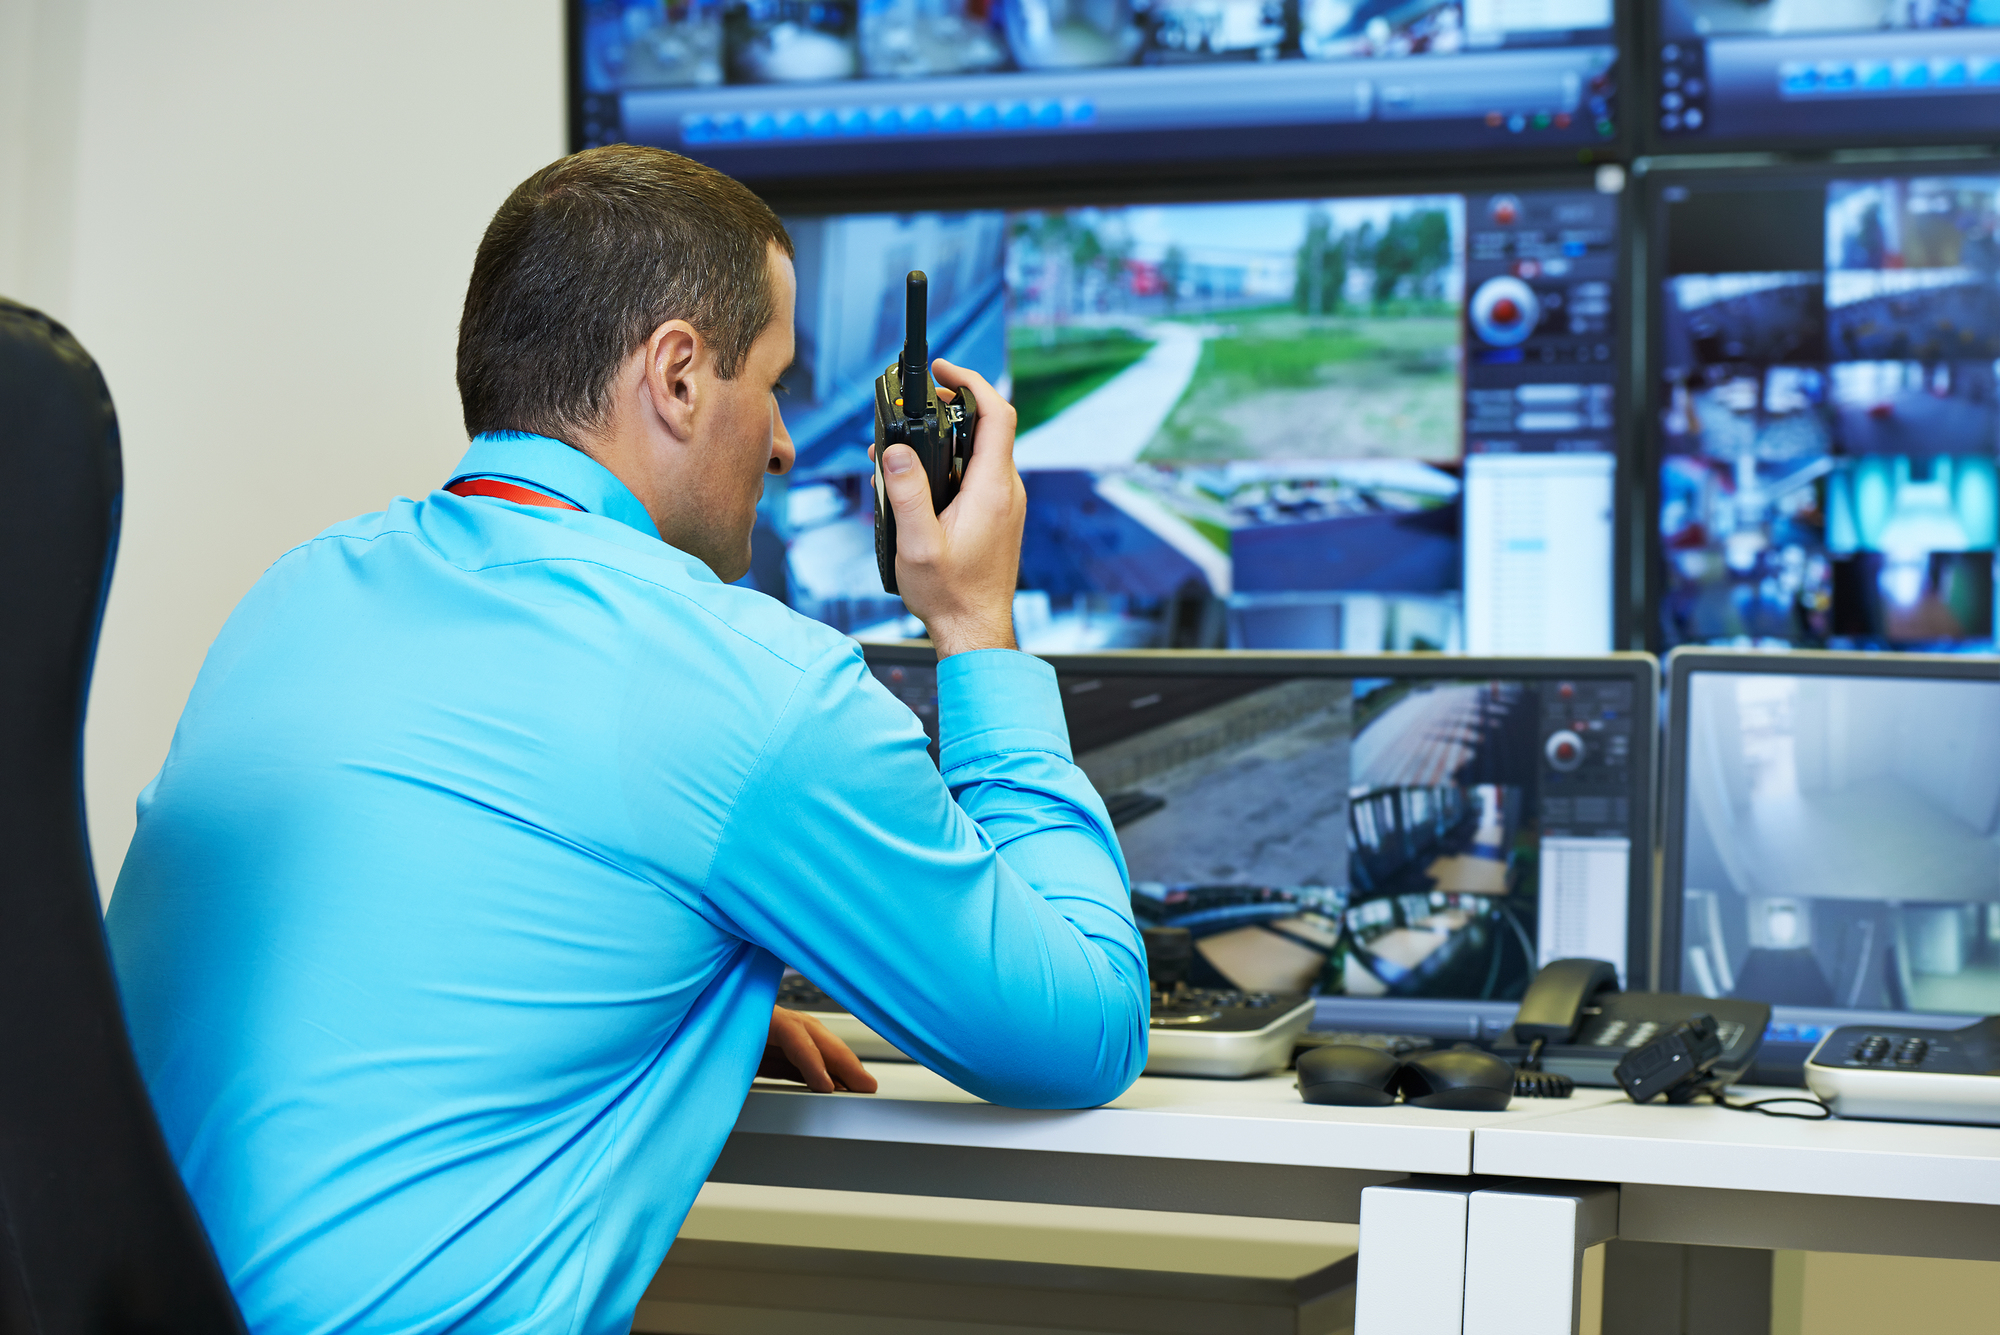 security guard watching video monitoring surveillance security s